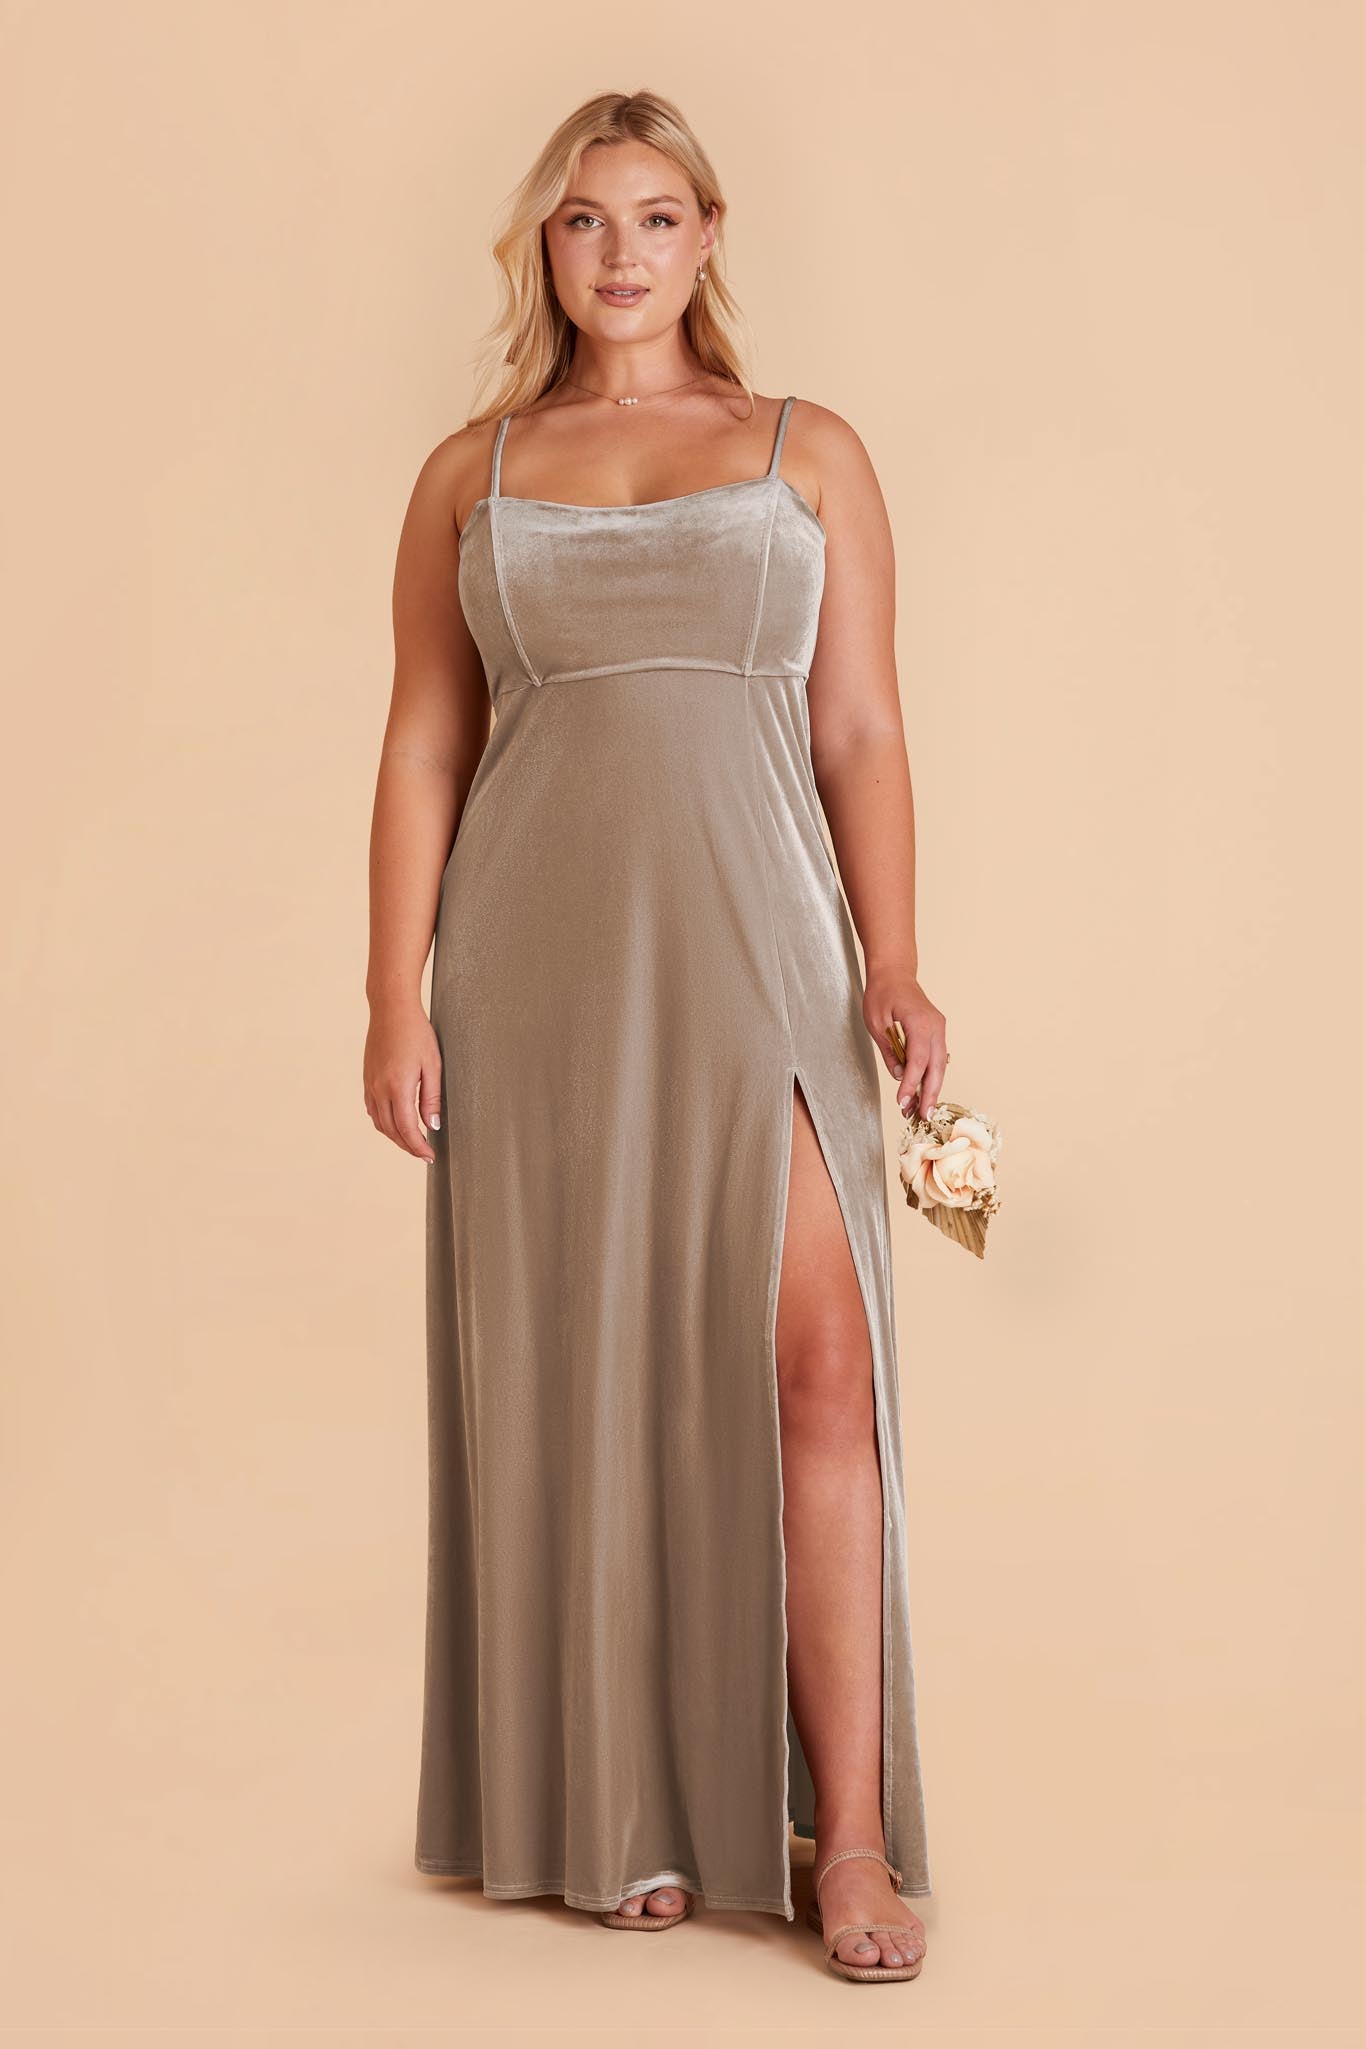 Taupe August Velvet Dress by Birdy Grey